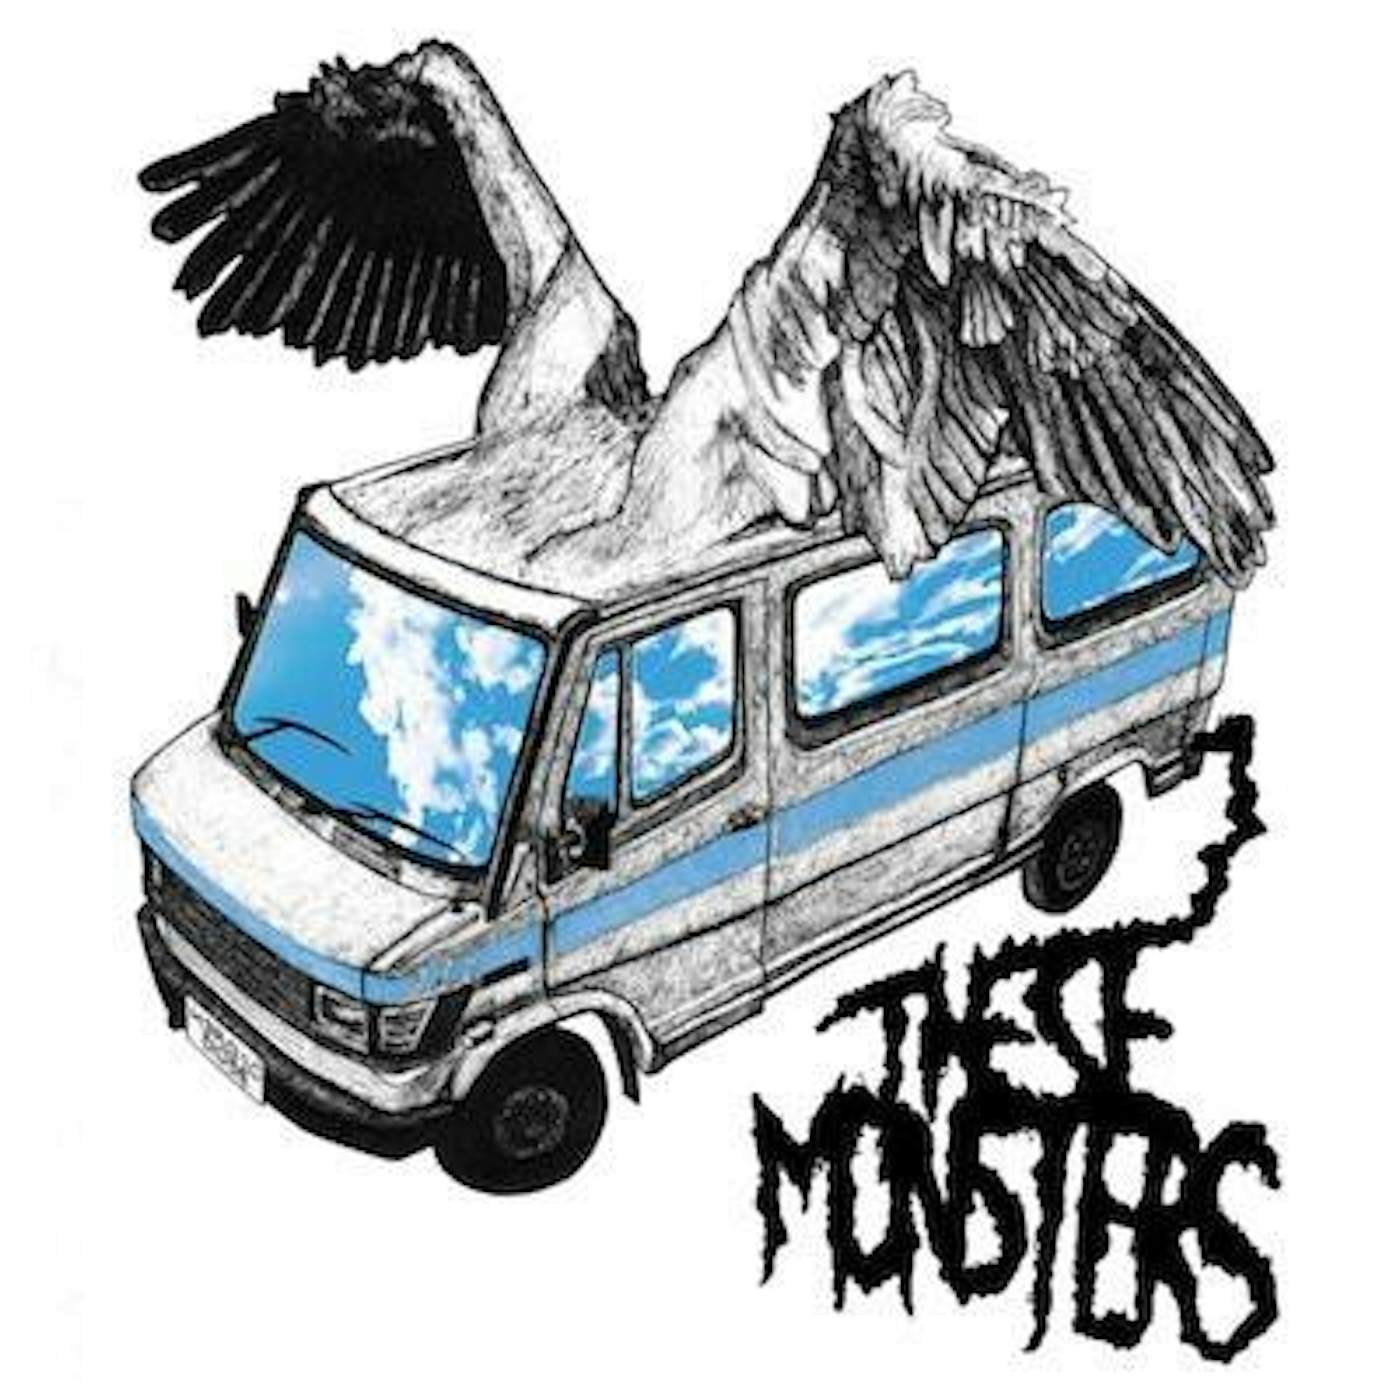 These Monsters Heroic Dose Vinyl Record